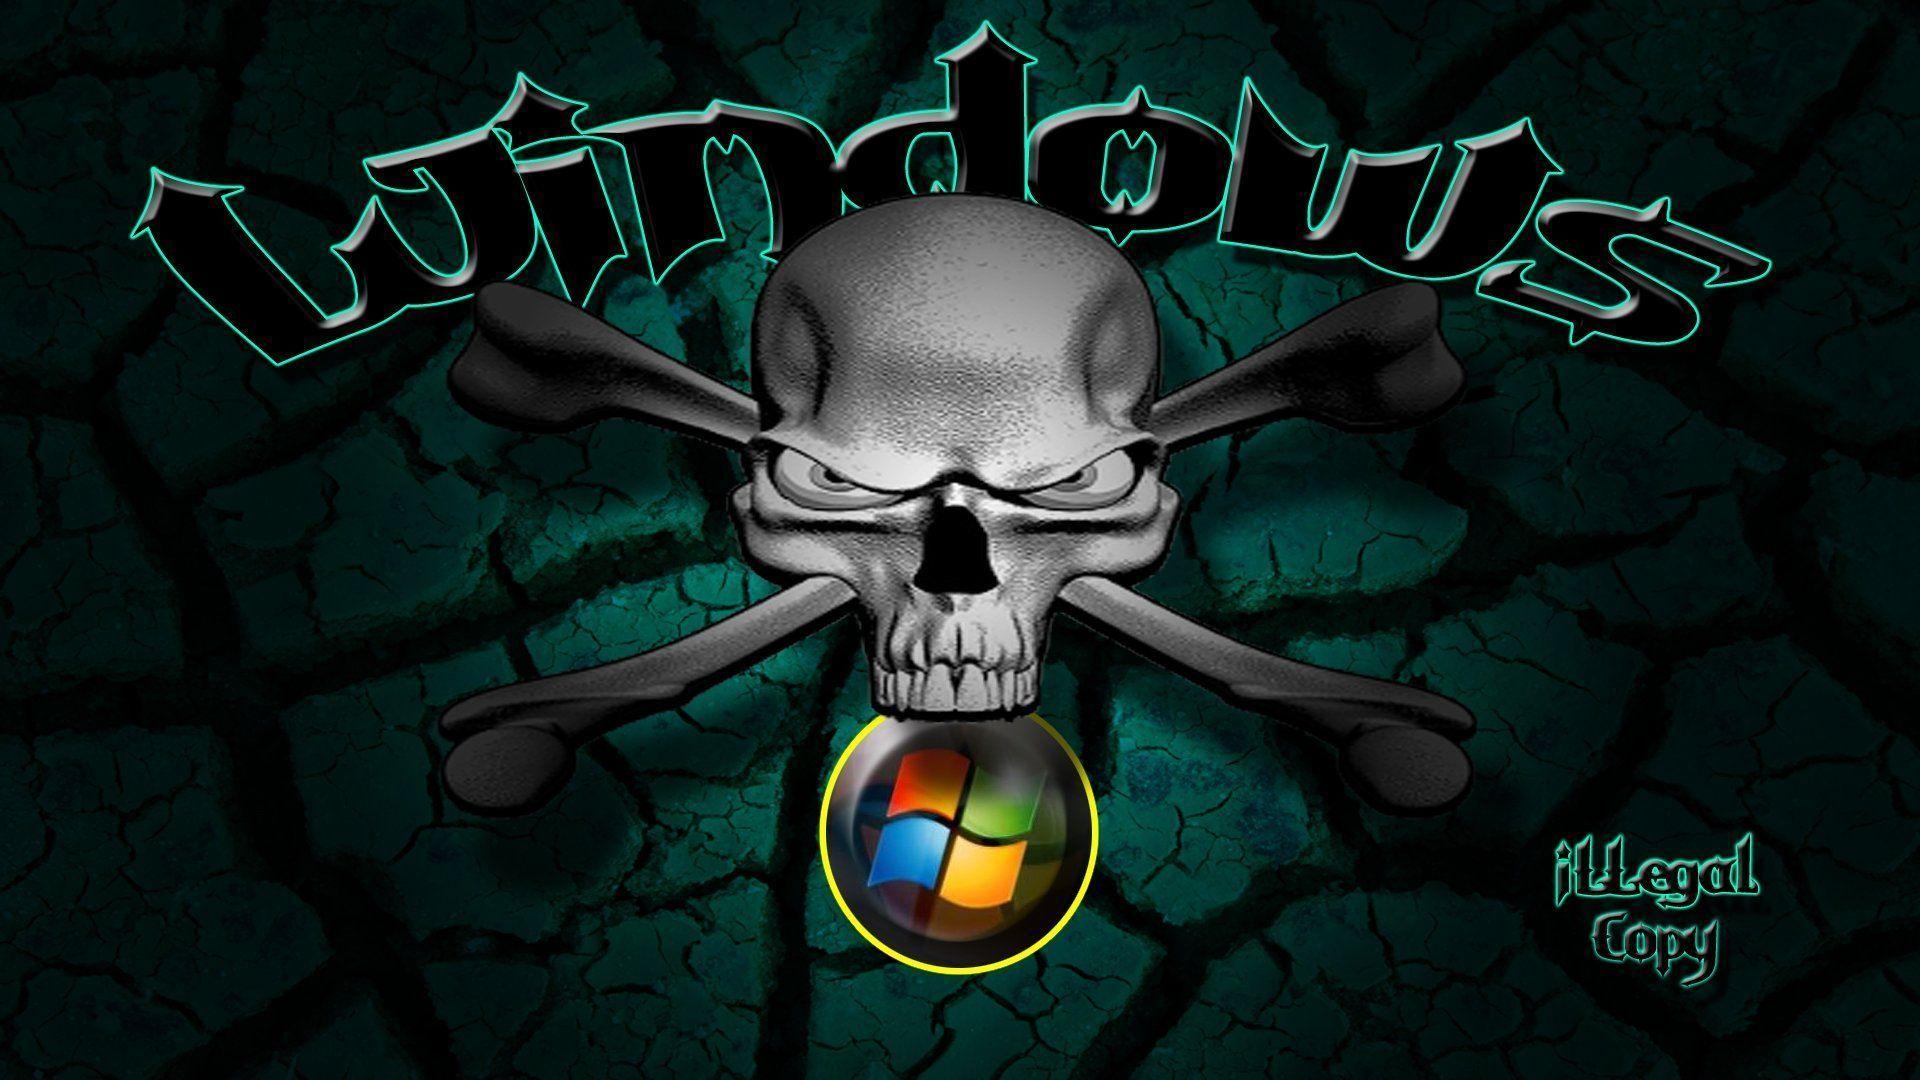 Best Of Skull and Crossbones Wallpaper Free HD Picture Download. My